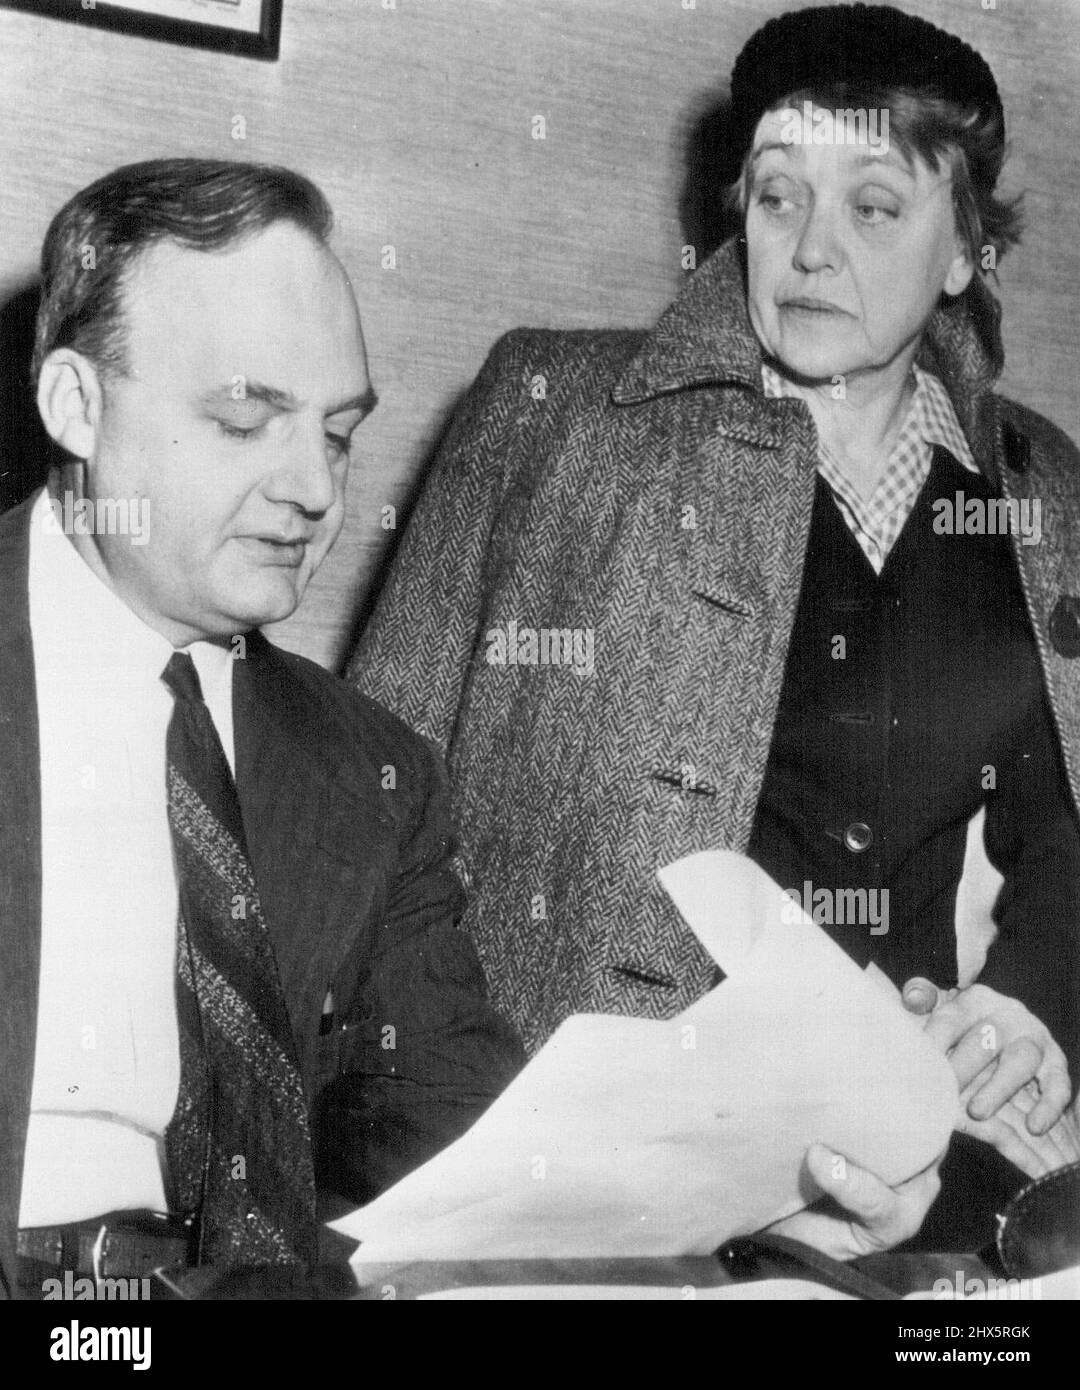 Author Confers With Attorney on Spy Charges - Agnes Smedley, American author, confers with her attorney, O. John Rogge, here today, after the U.S. Army released a report of Russian spy activities in Japan during the war. The report, a copy of which Rogge is reading, links Miss Smedley to the ring as its Shanghai operative, and says she 'is a spy and agent of the Soviet government.' The Army report says the Japanese smashed the ring almost by accident just before the attack on Pearl Harbor in 1941. February 10, 1949. (Photo by AP Wirephoto). Stock Photo